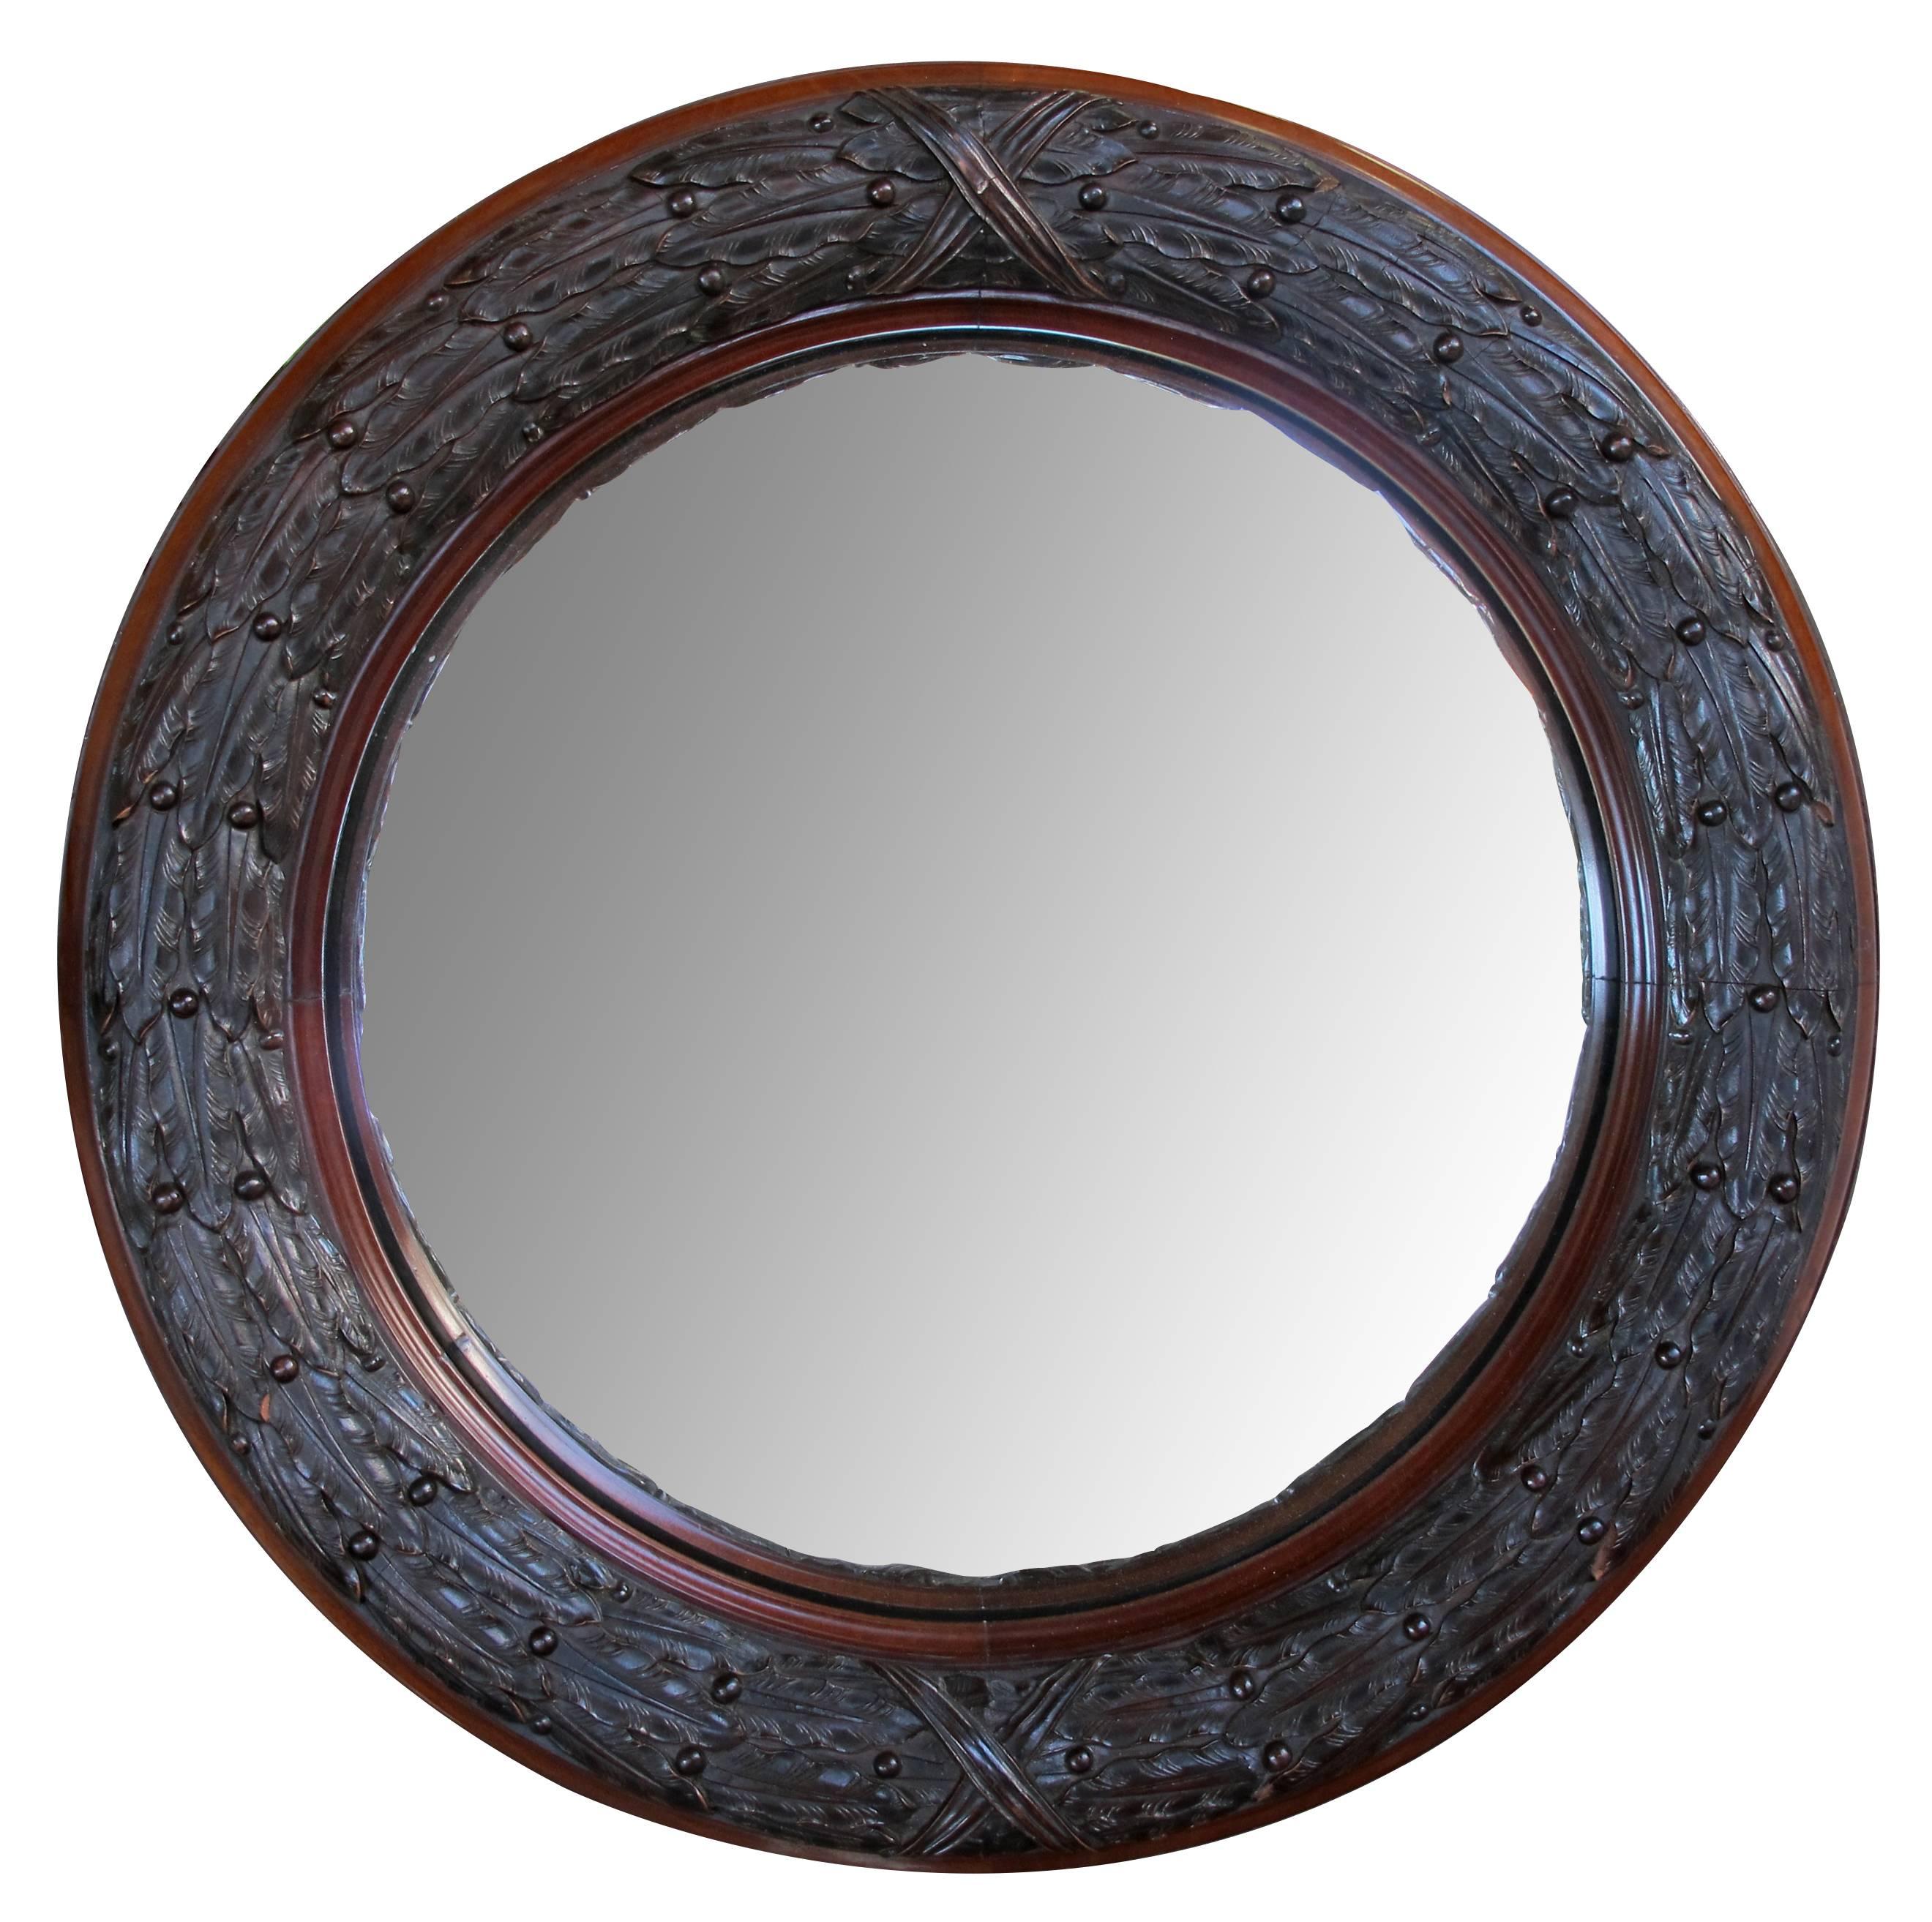 Well-Carved English Victorian Convex Mirror with Laurel Leaf Frame